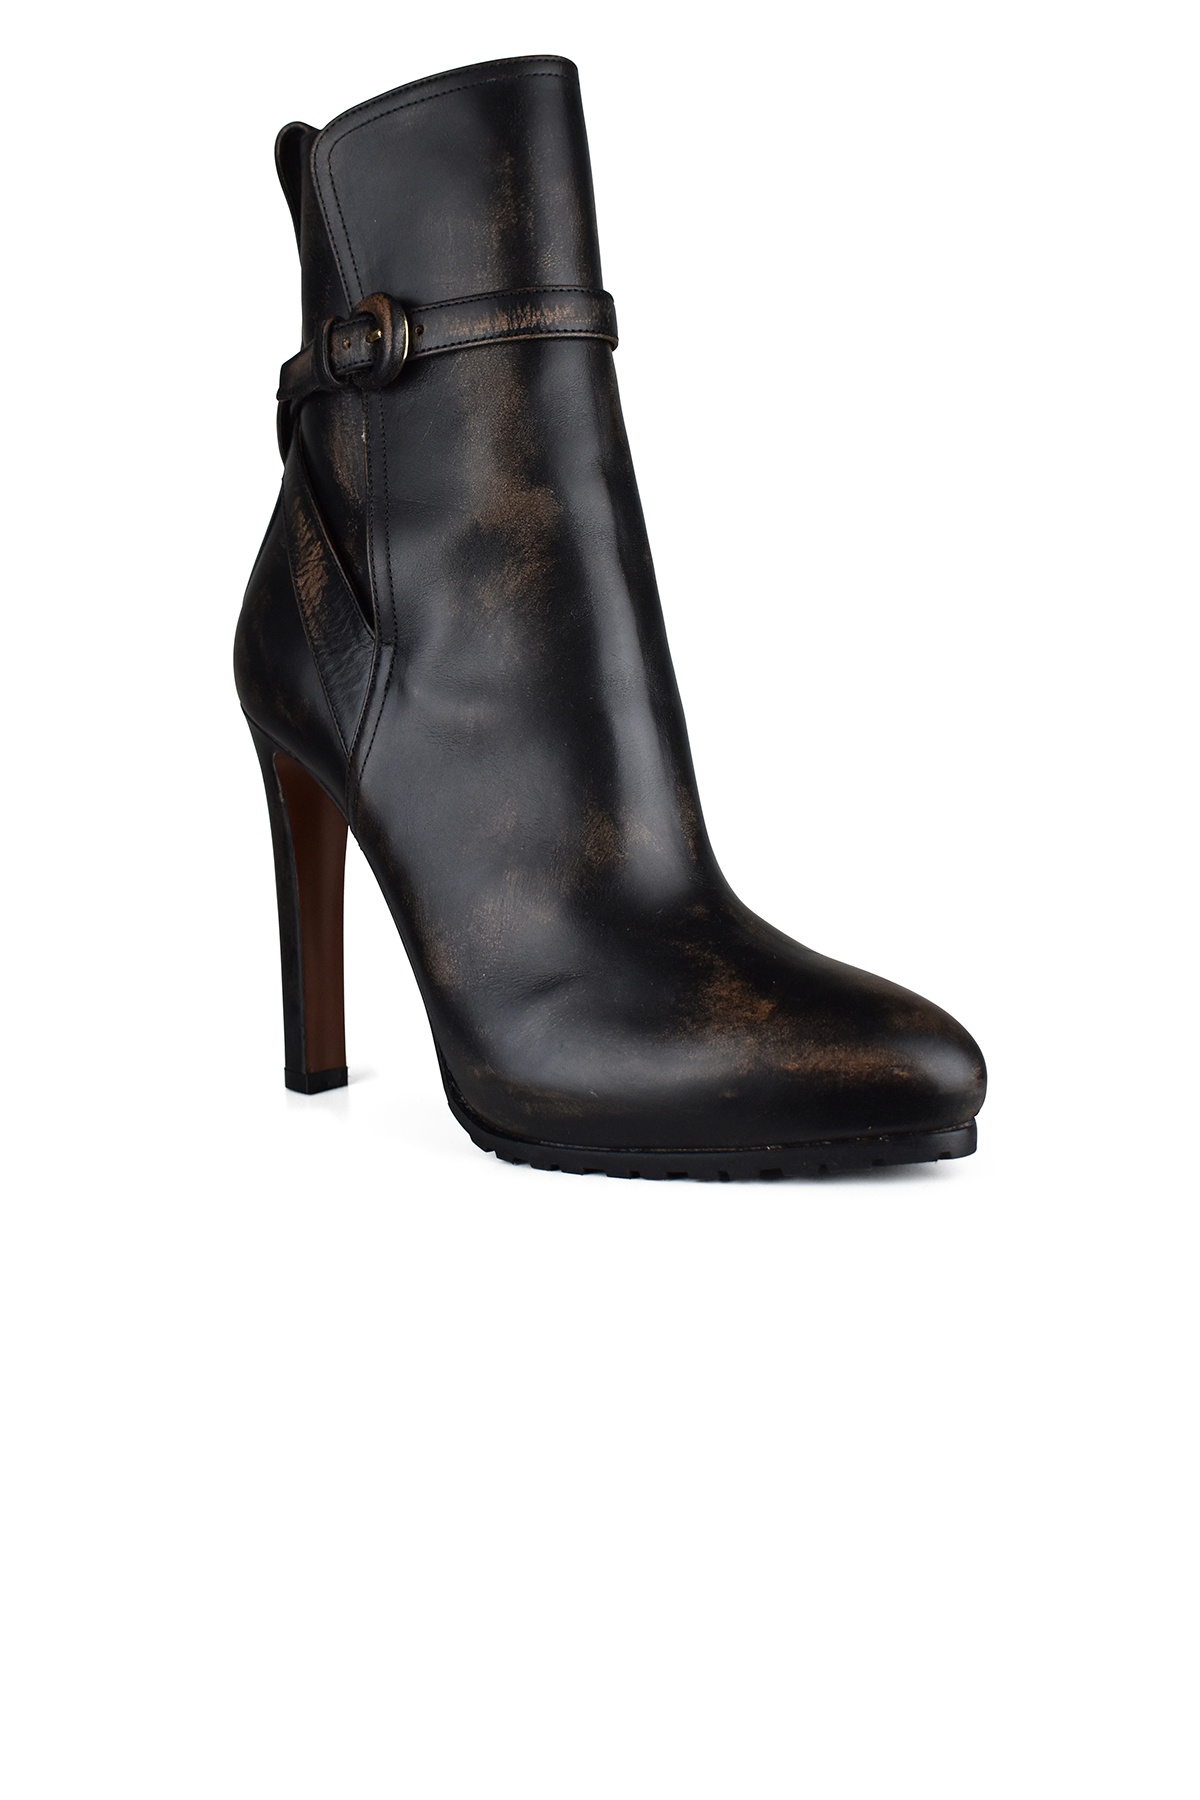 Recelle Boots - 3